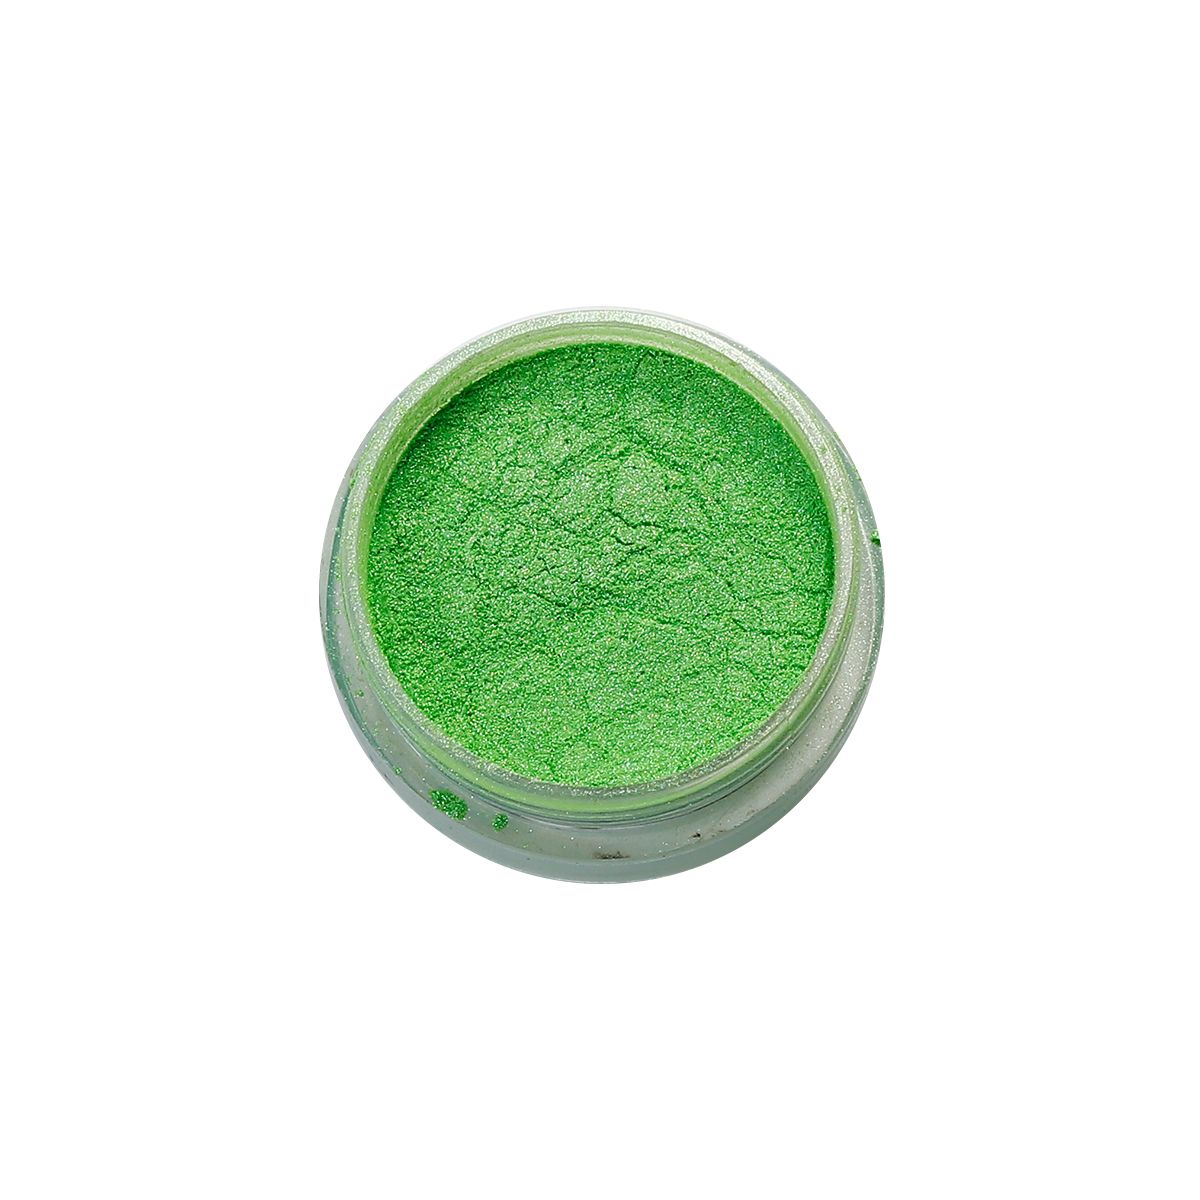 Picture of Resin Jewelry DIY Making Craft Glitter Powder Green 30mm(1 1/8") Dia., 1 Piece